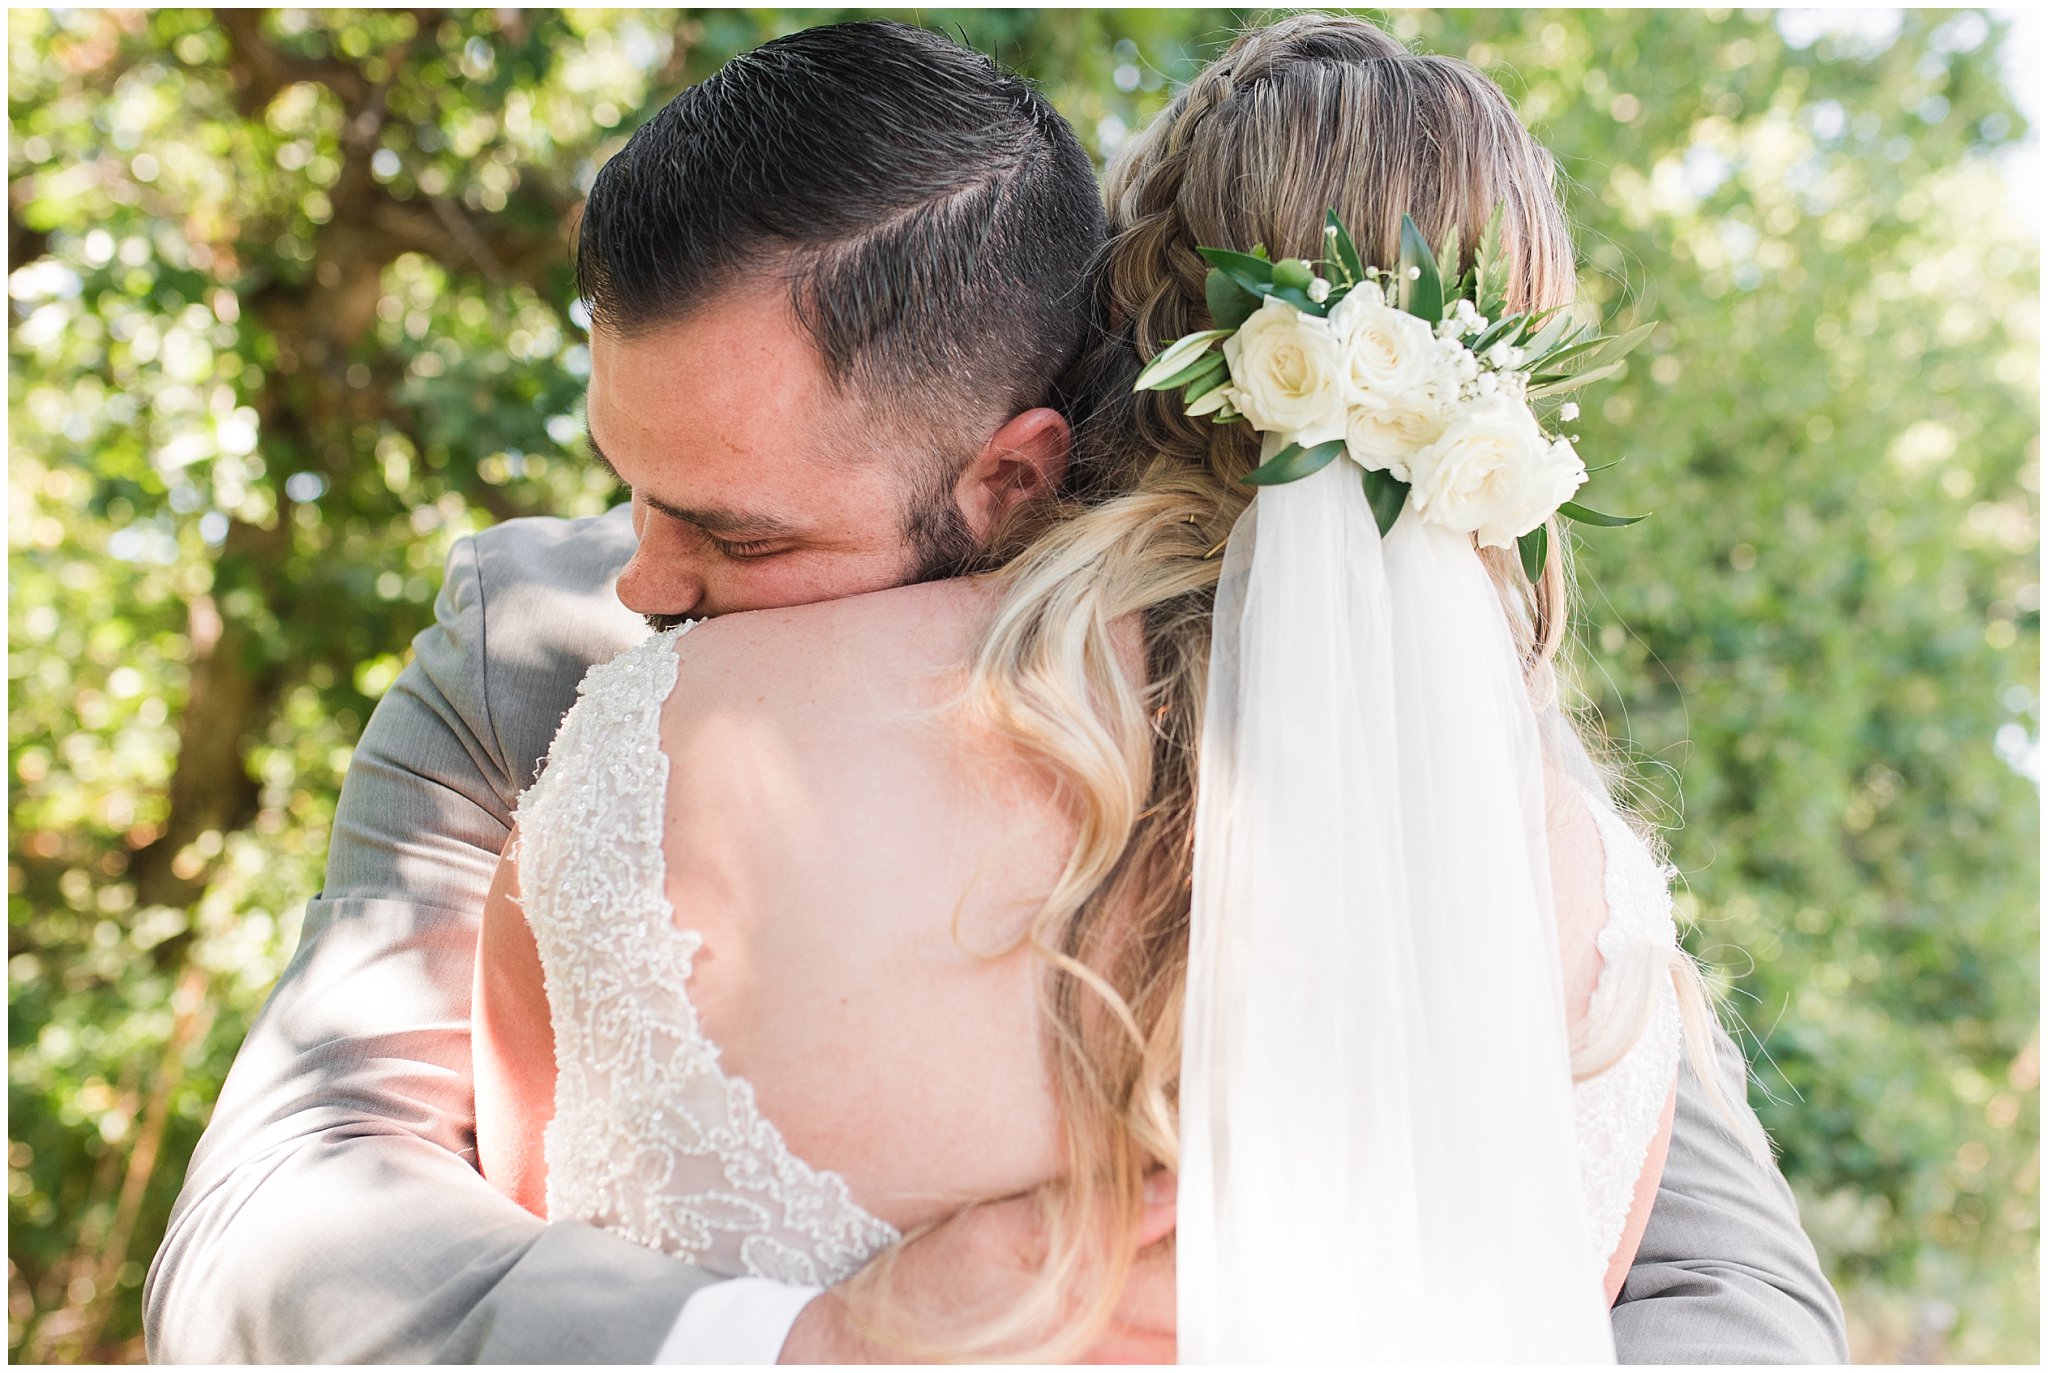 Bride and groom first look in woods wearing gray suit and sage green tie and champagne dress with veil | Sage Green and Gray Summer Wedding at Oak Hills | Jessie and Dallin Photography